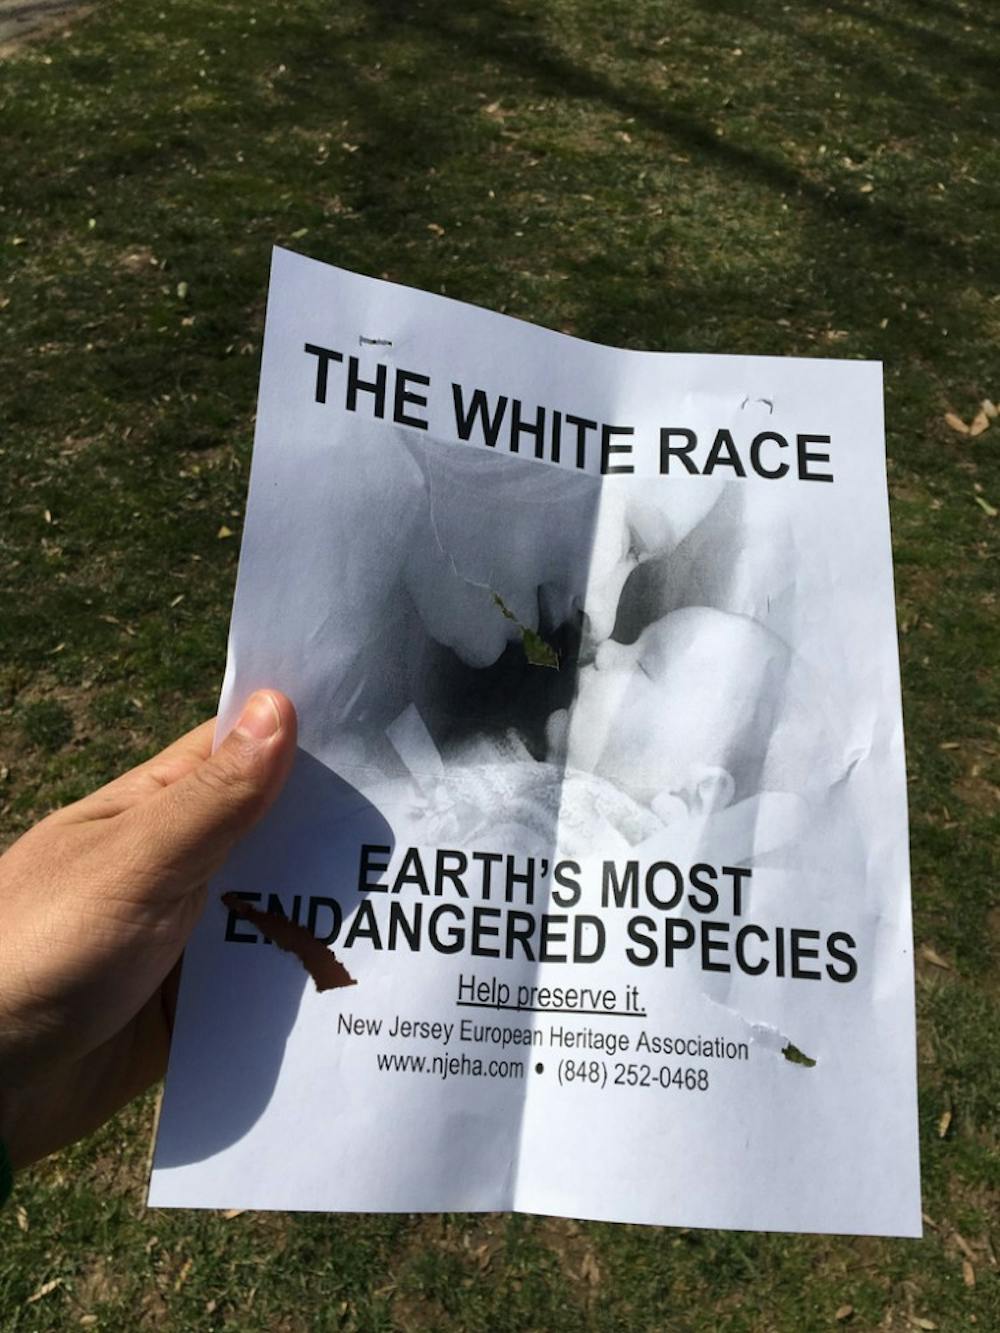 A poster advertising a white supremacist organization was found near campus.